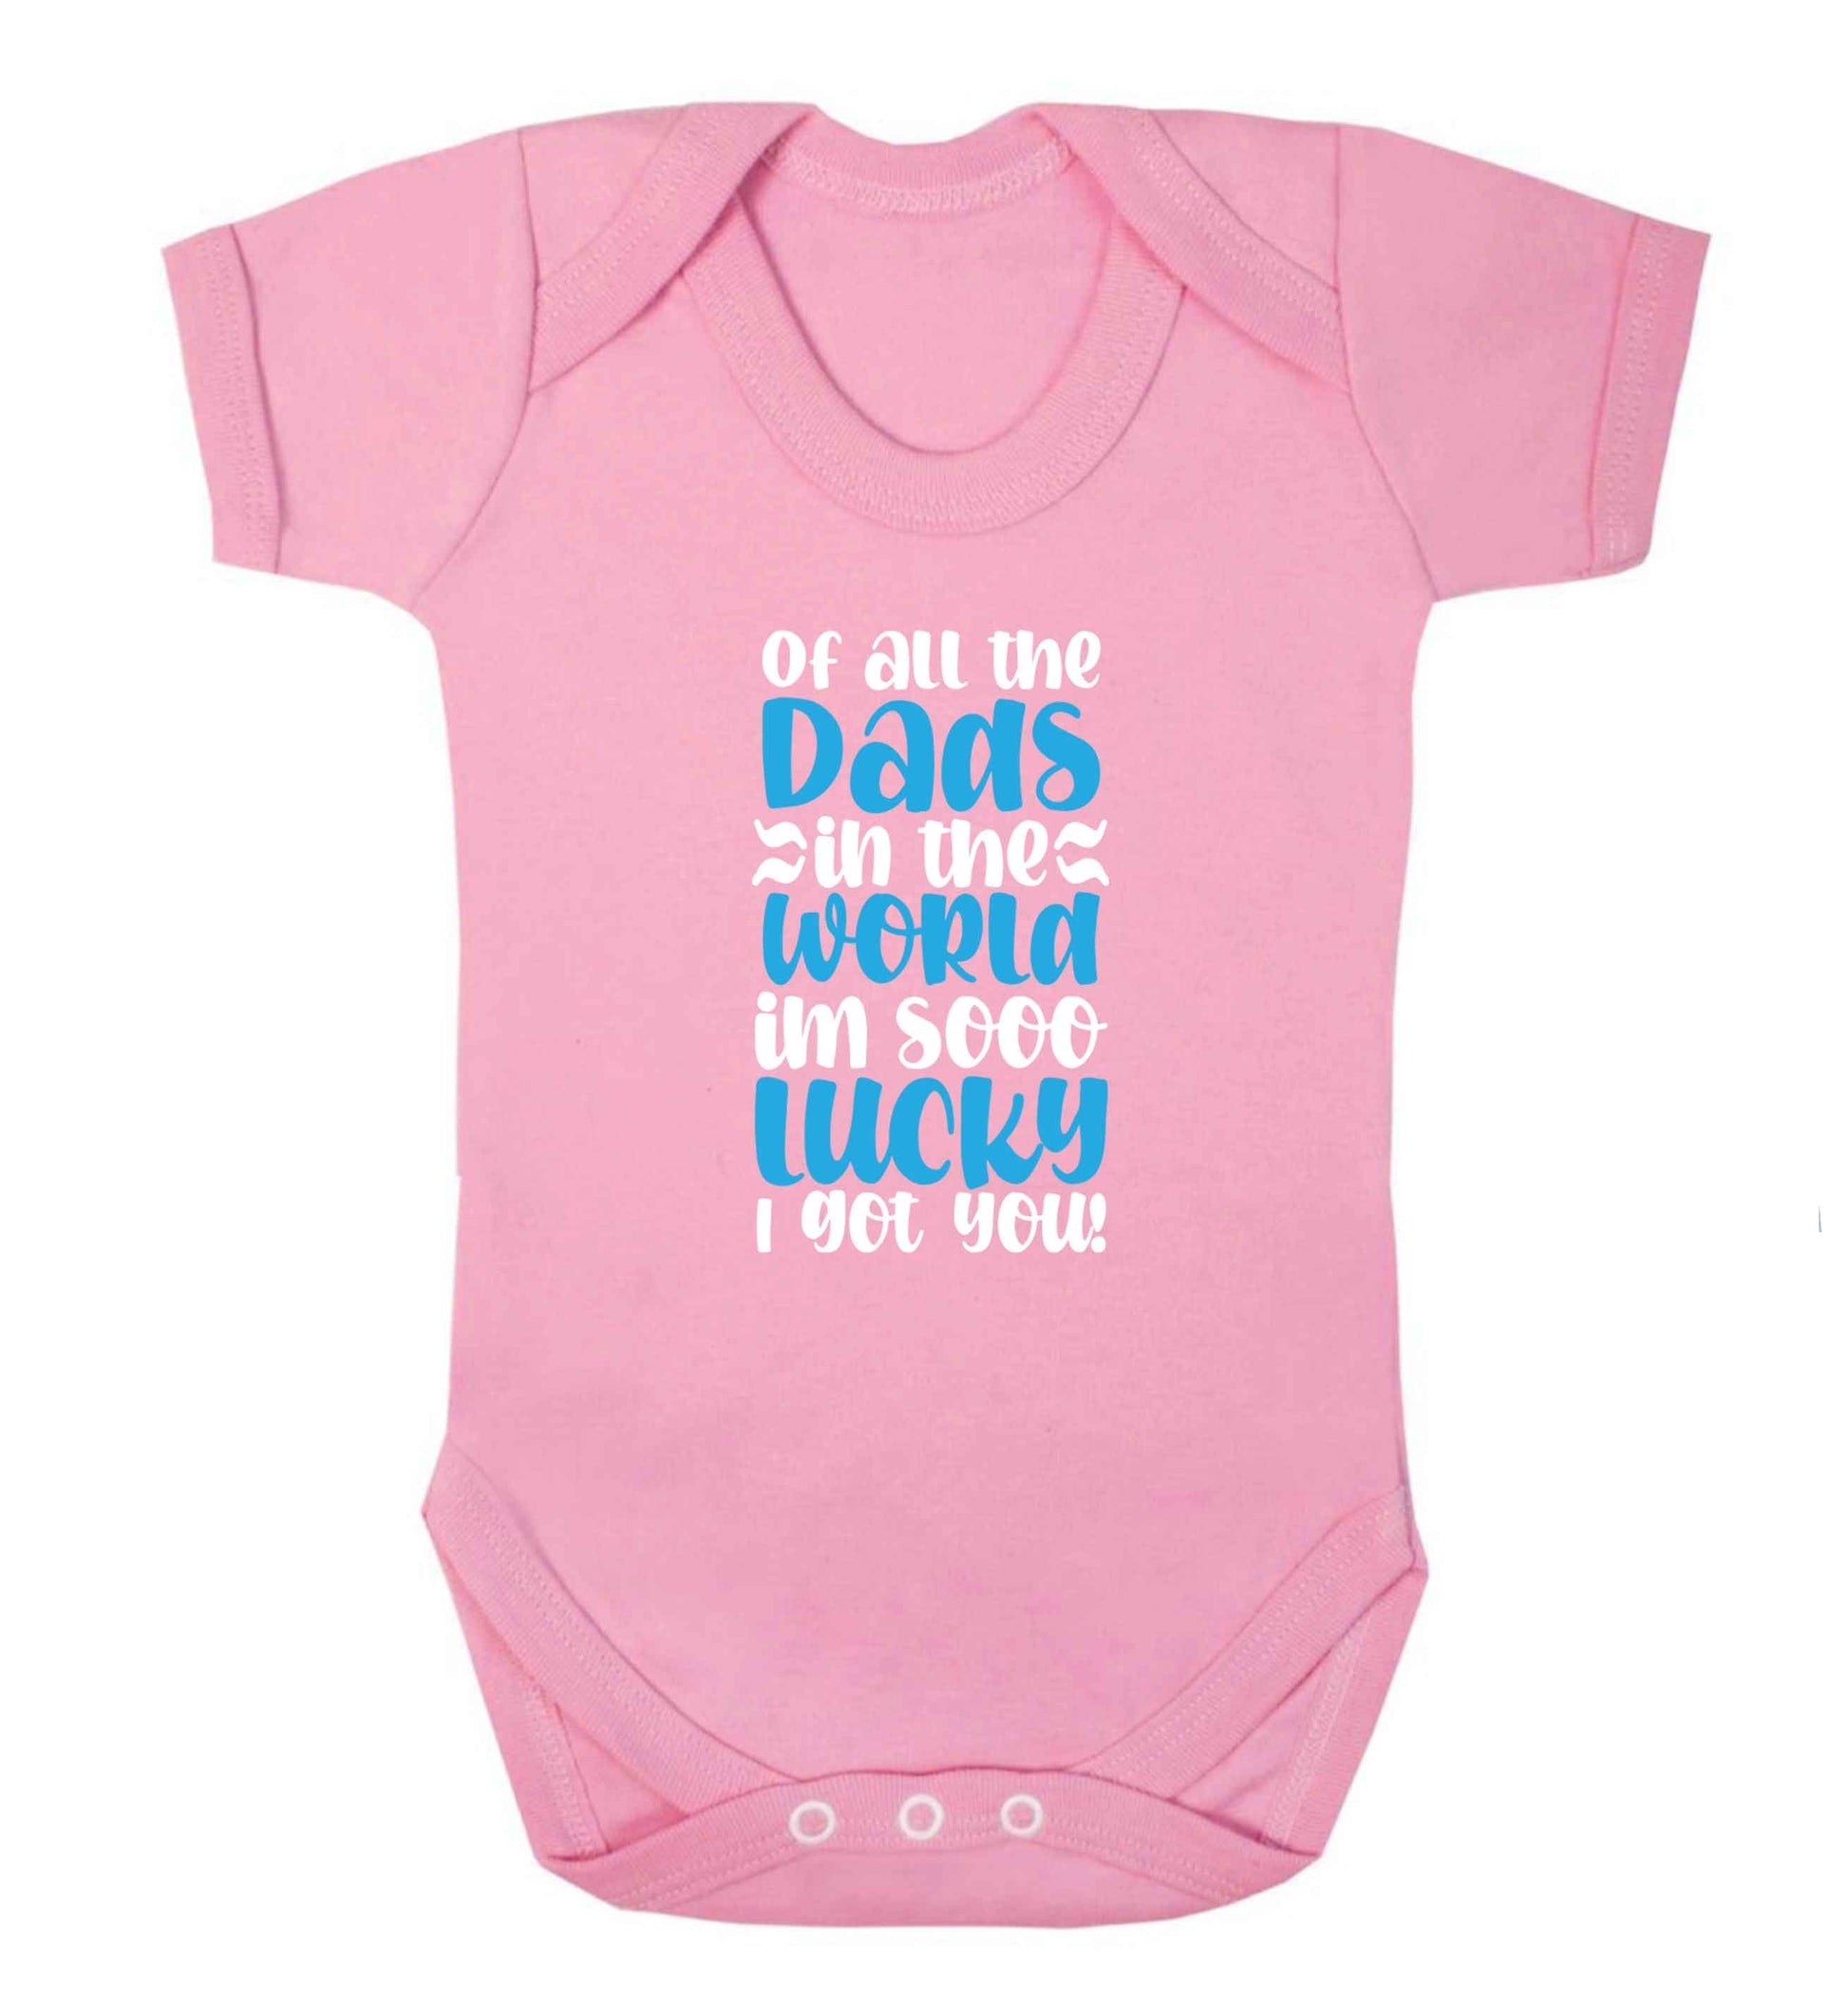 I'm as lucky as can be the worlds greatest dad belongs to me! baby vest pale pink 18-24 months